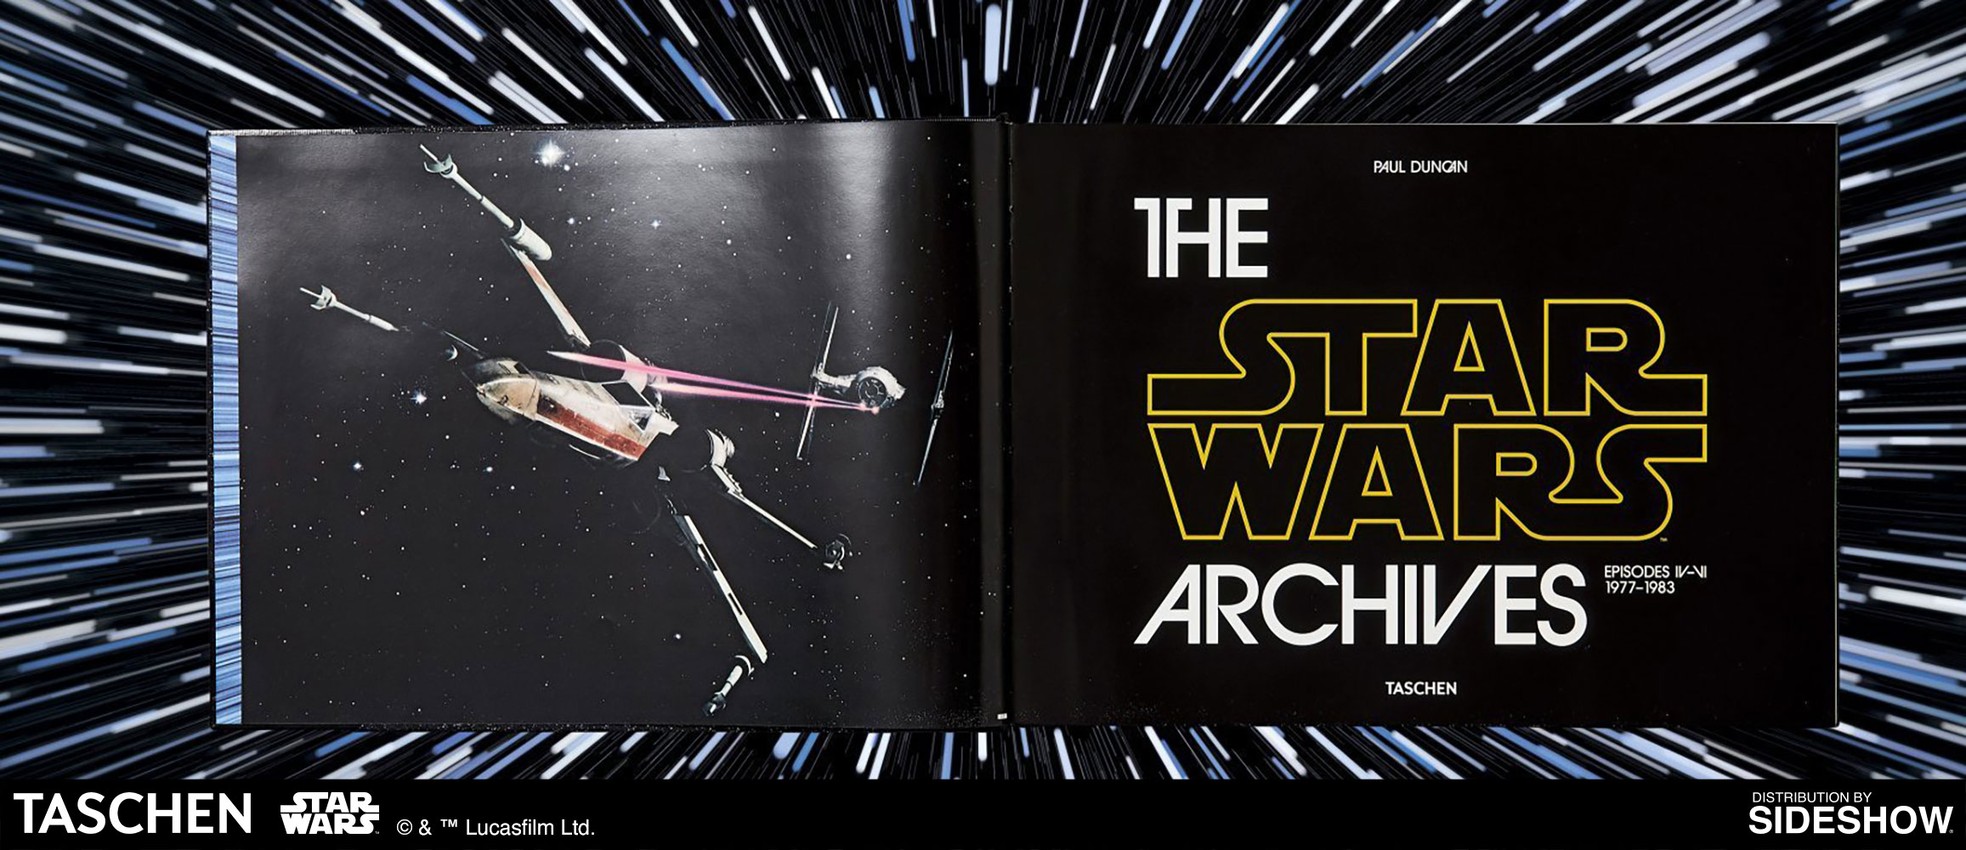 The Star Wars Archives: 1977 - 1983